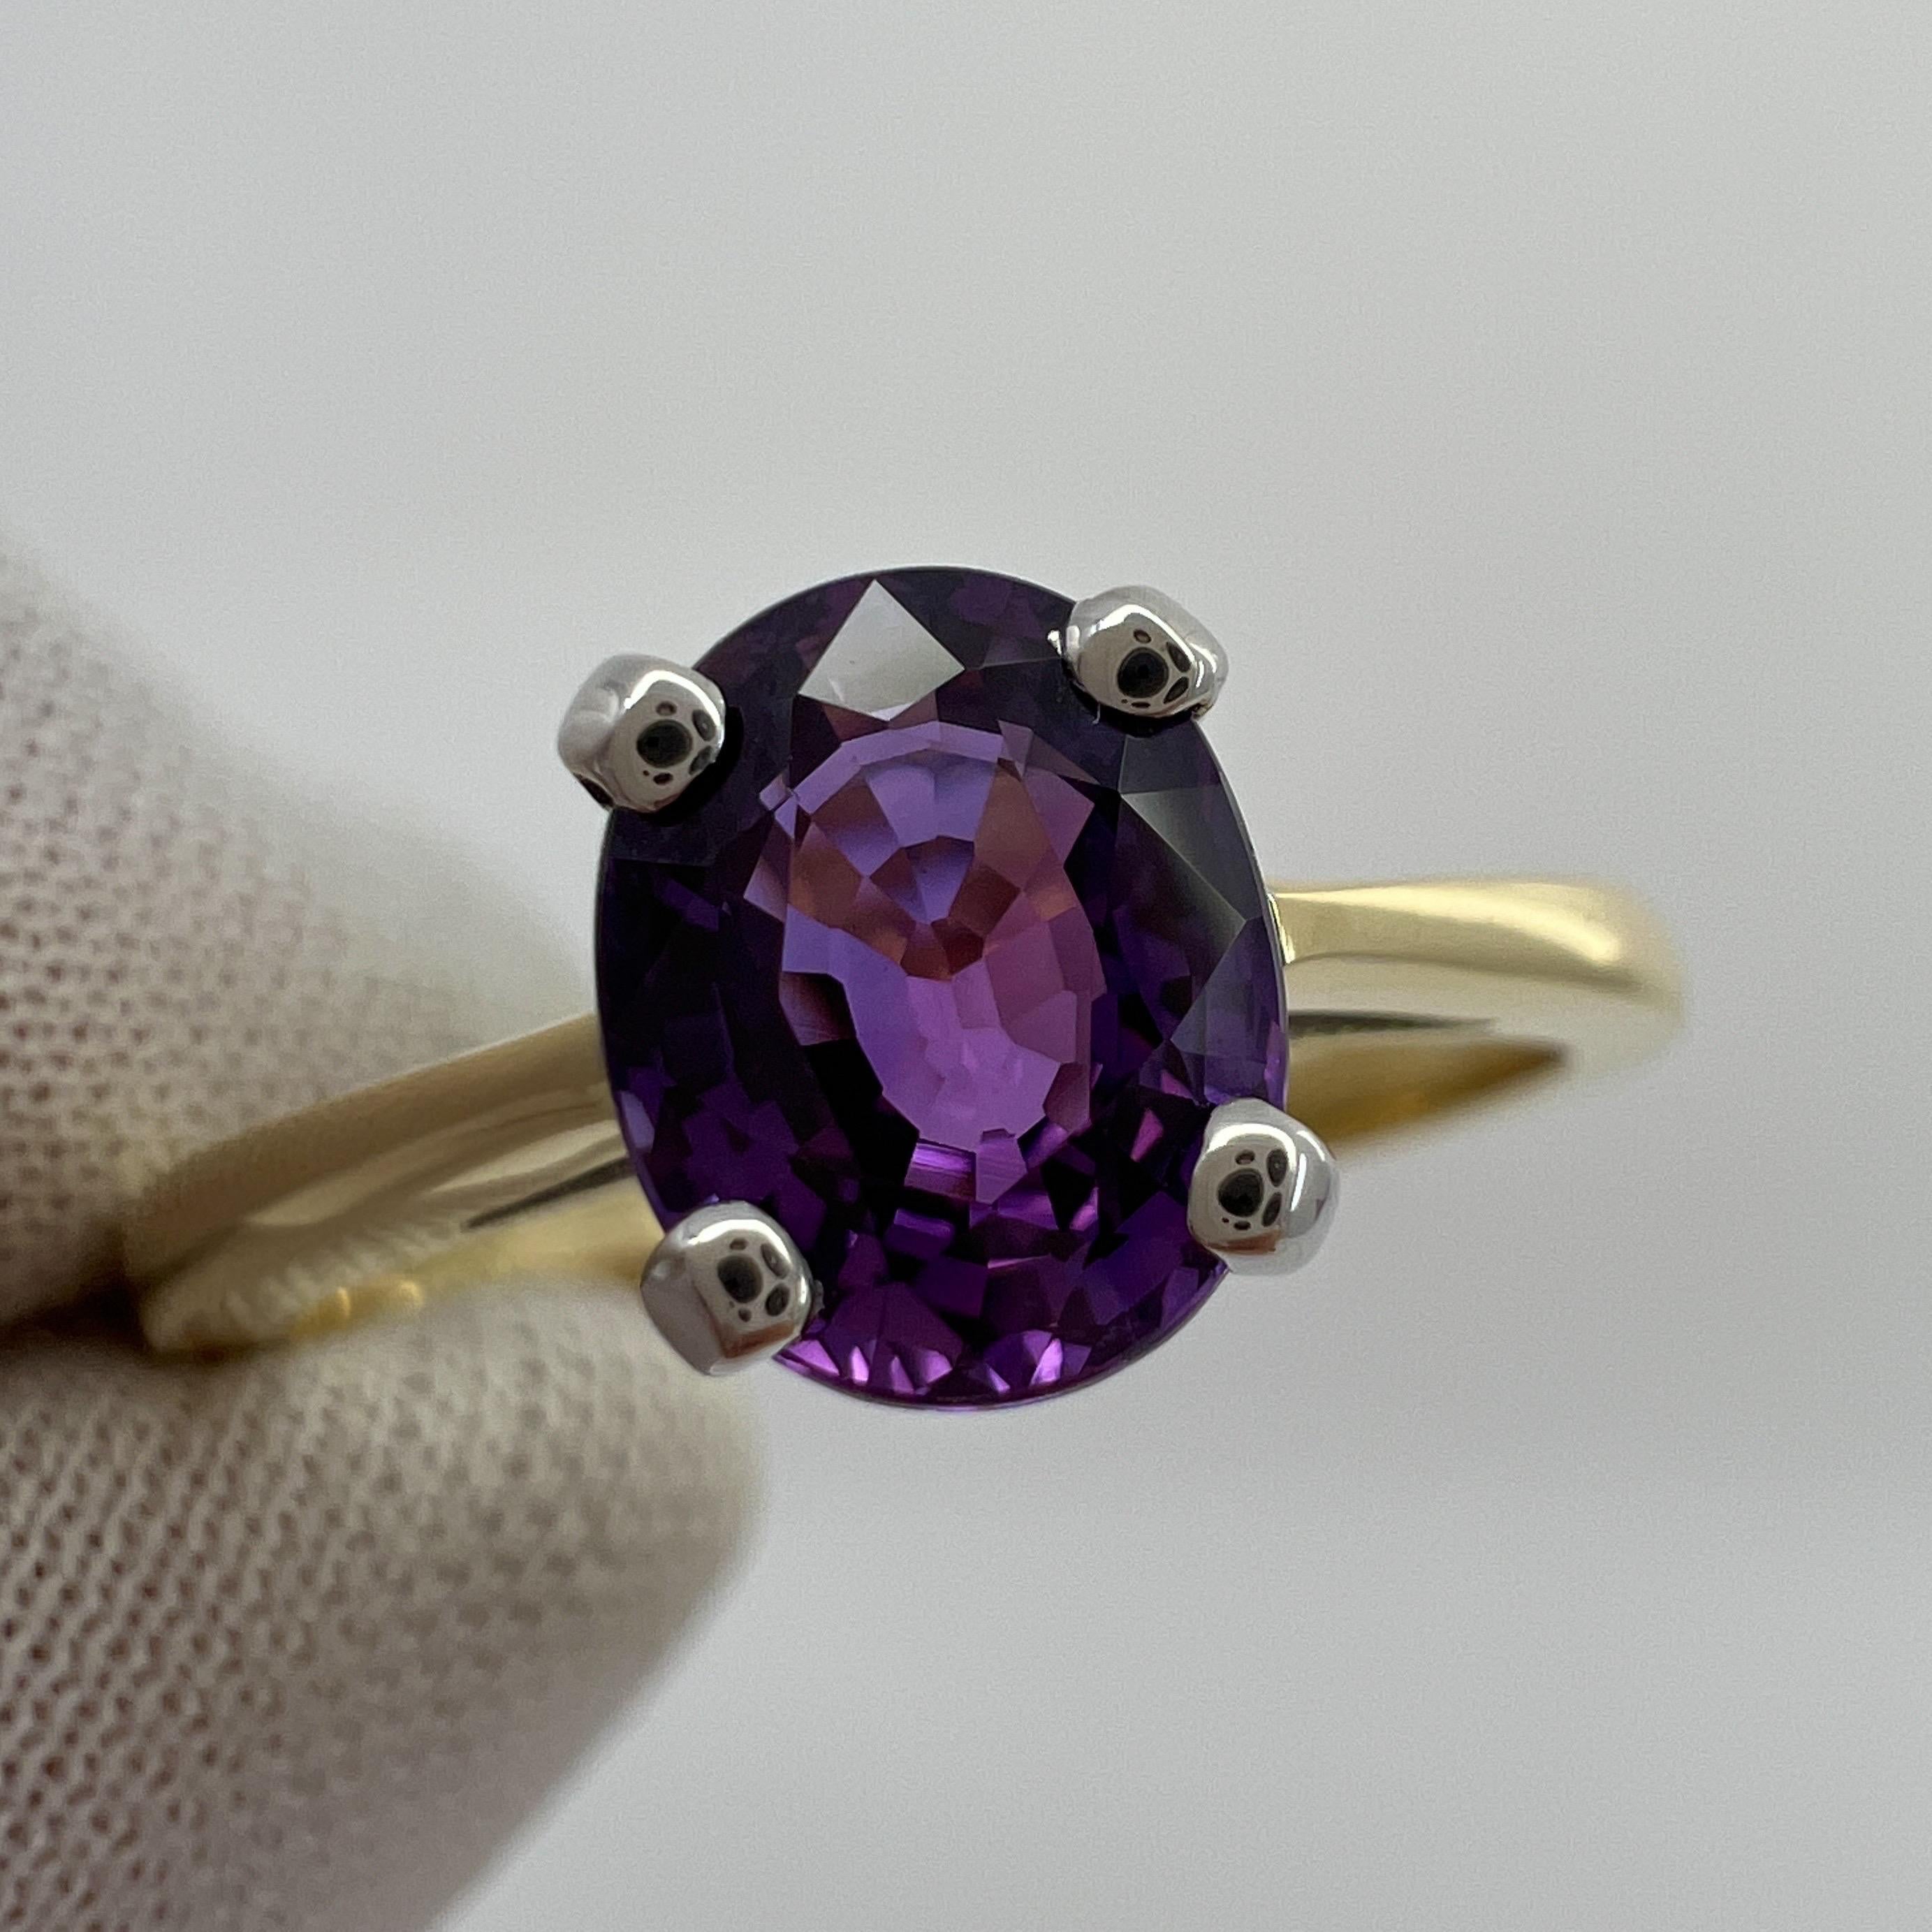 Natural Deep Purple Sapphire Oval Cut 18k Multi Tone Gold Solitaire Ring.

1.59 Carat sapphire with a stunning deep purple colour and excellent clarity, a very clean stone.

This sapphire also has an excellent oval cut which shows lots of sparkle